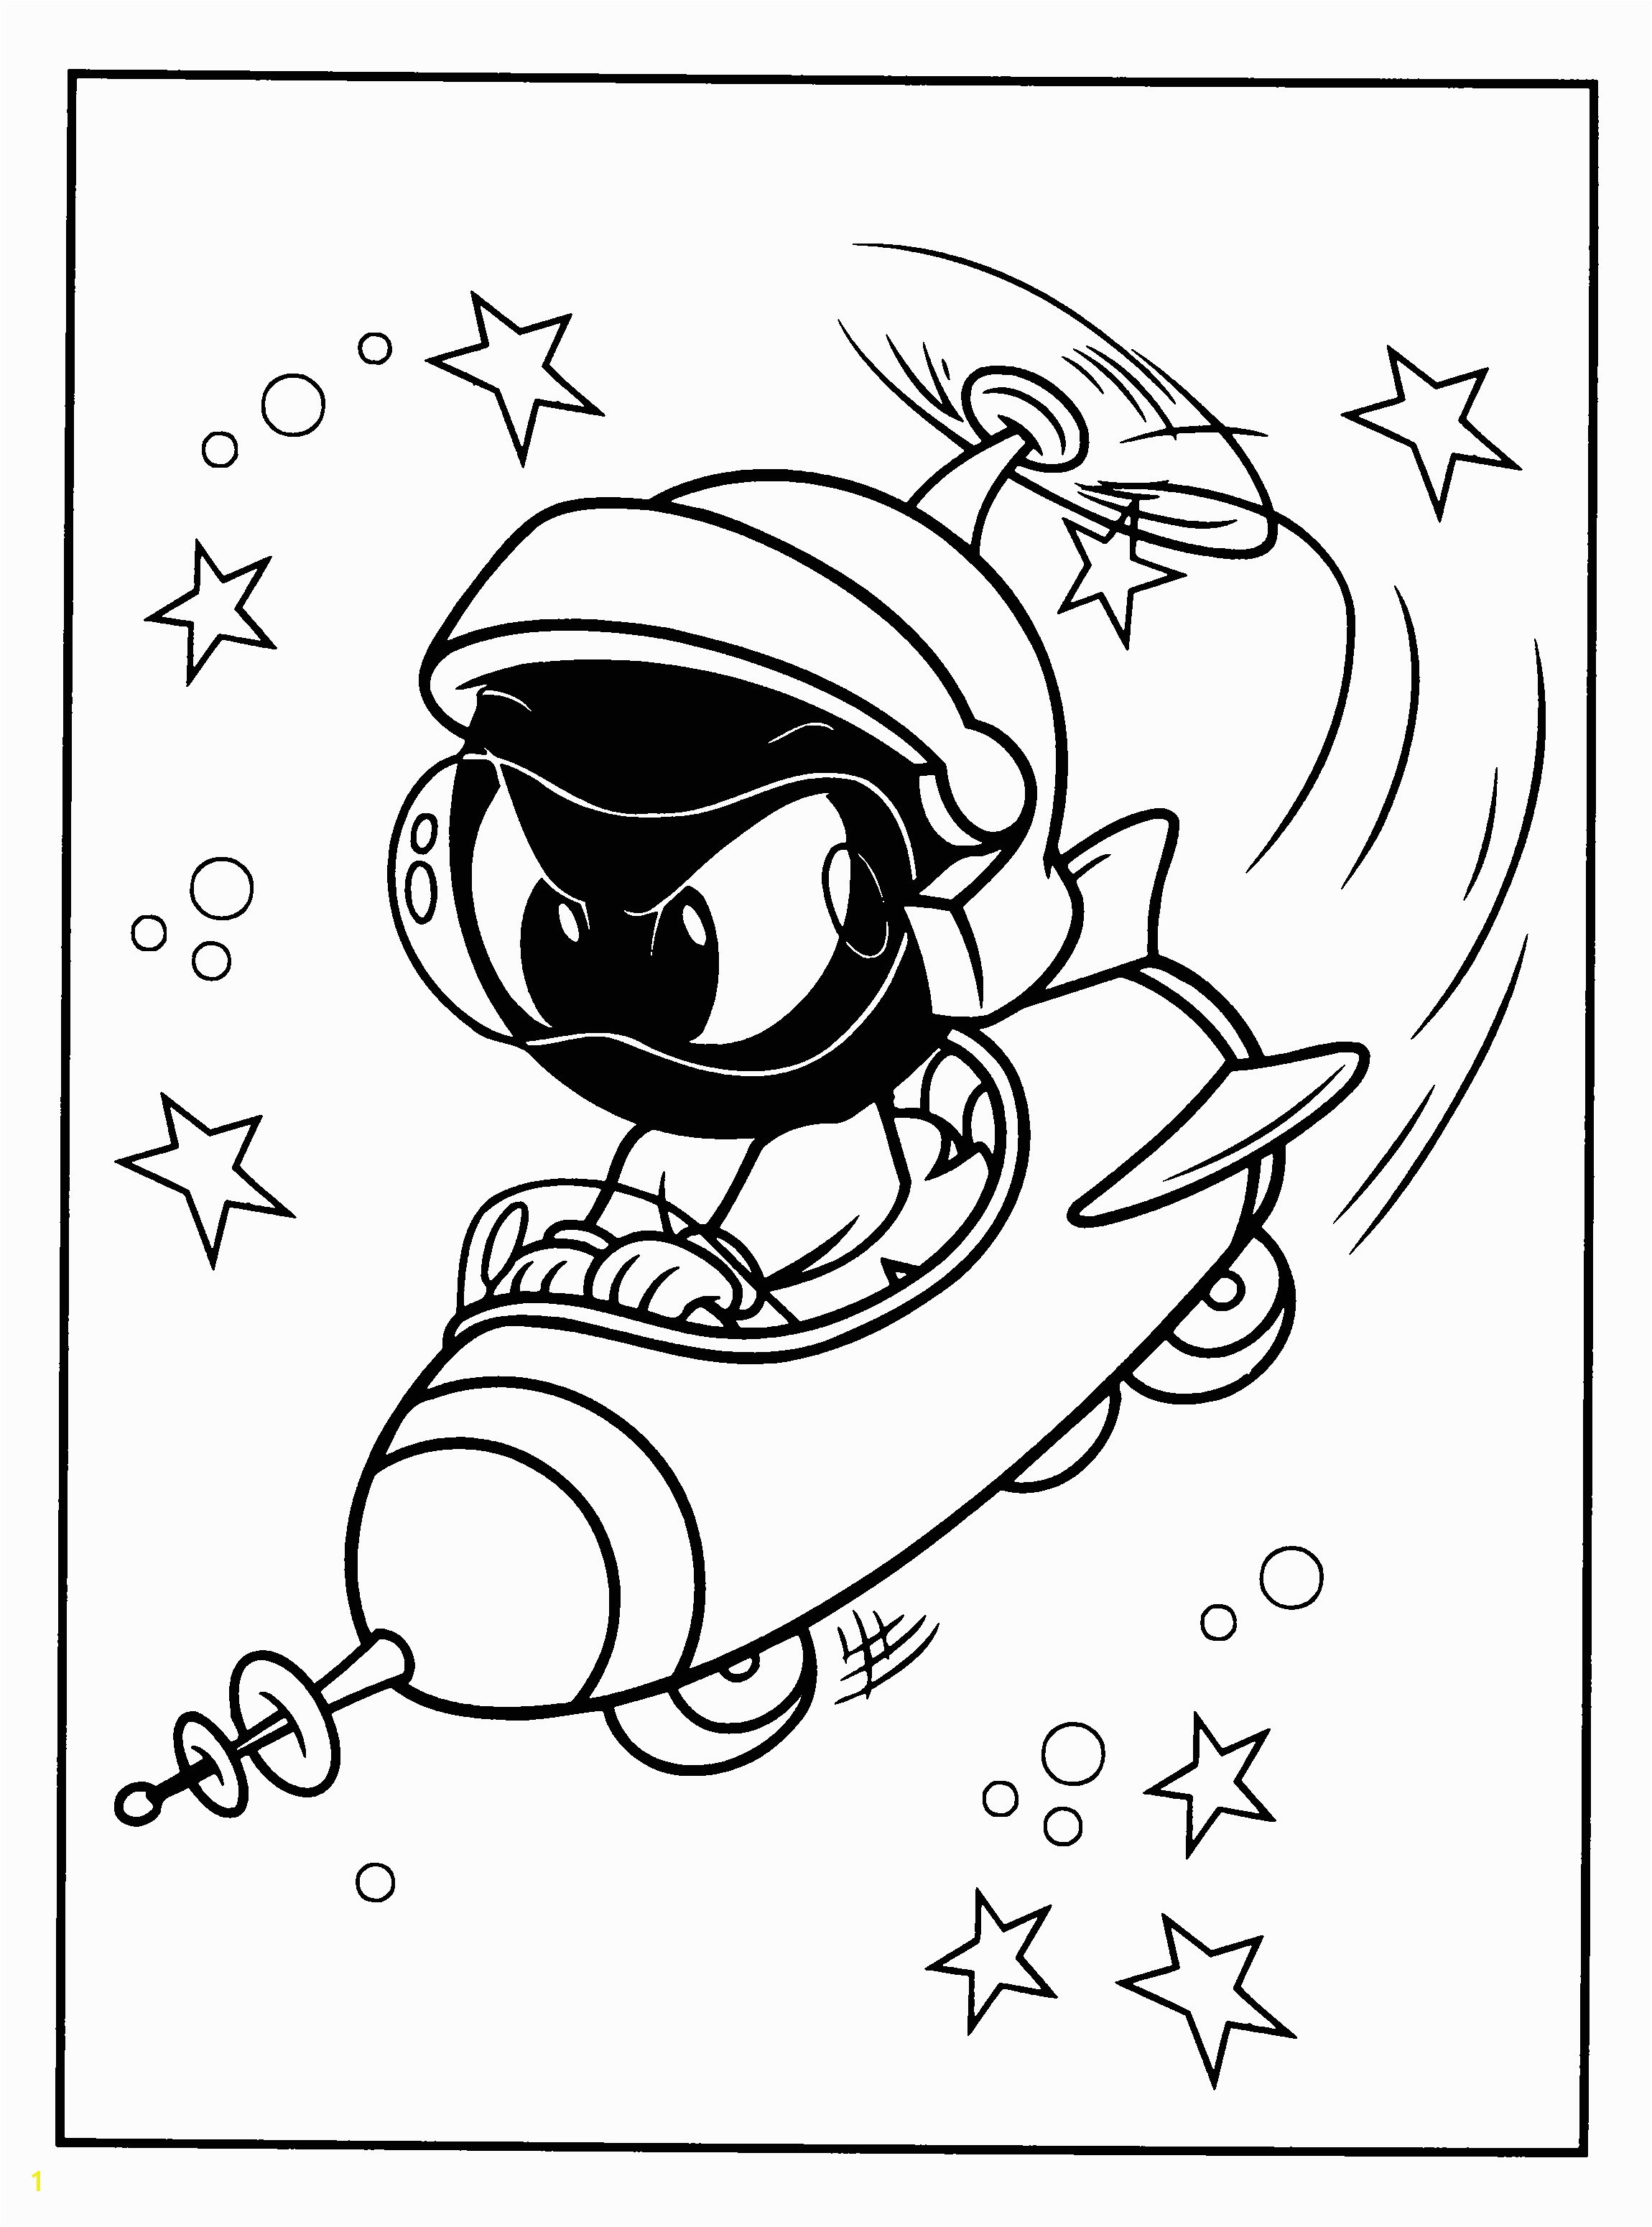 Looney tunes coloring pages baby looney tunes looneytunes a